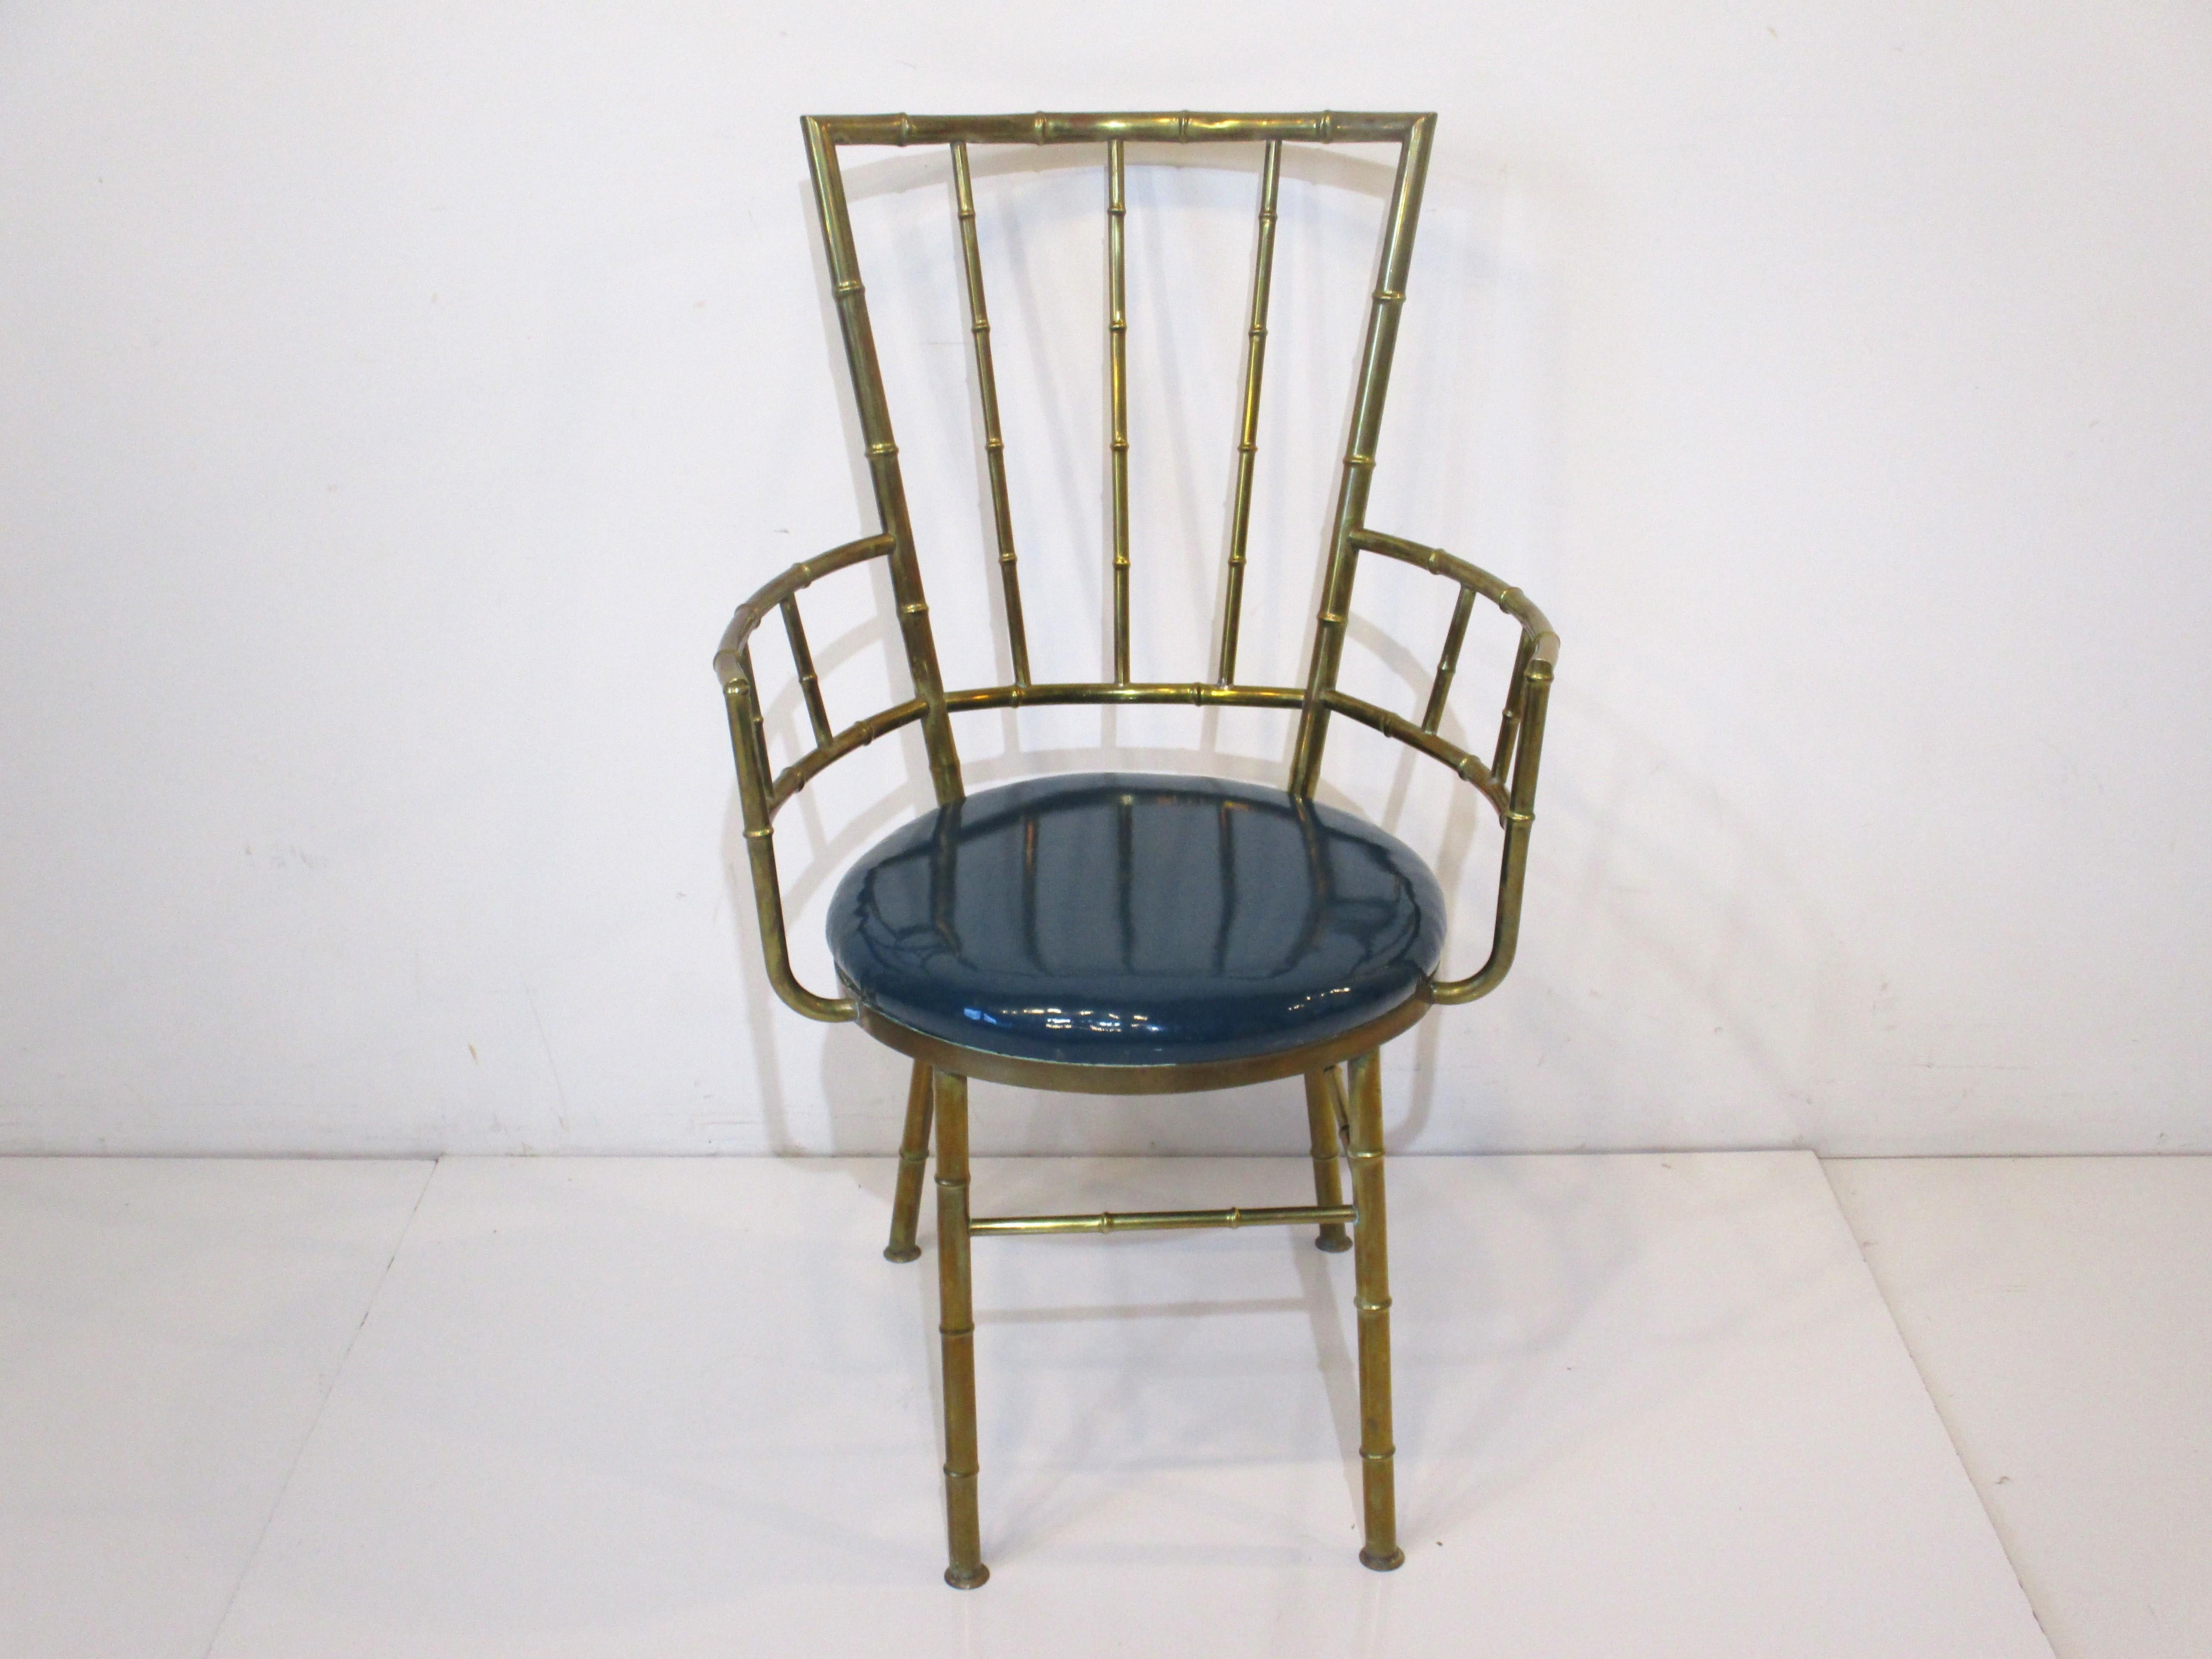 A very elegant faux bamboo styled brass arm chair with upholstered seat in a glossy high grade deep marine blue green vinyl fabric. This well crafted chair is in a small scale perfect for that added detailed piece for your living space or dressing